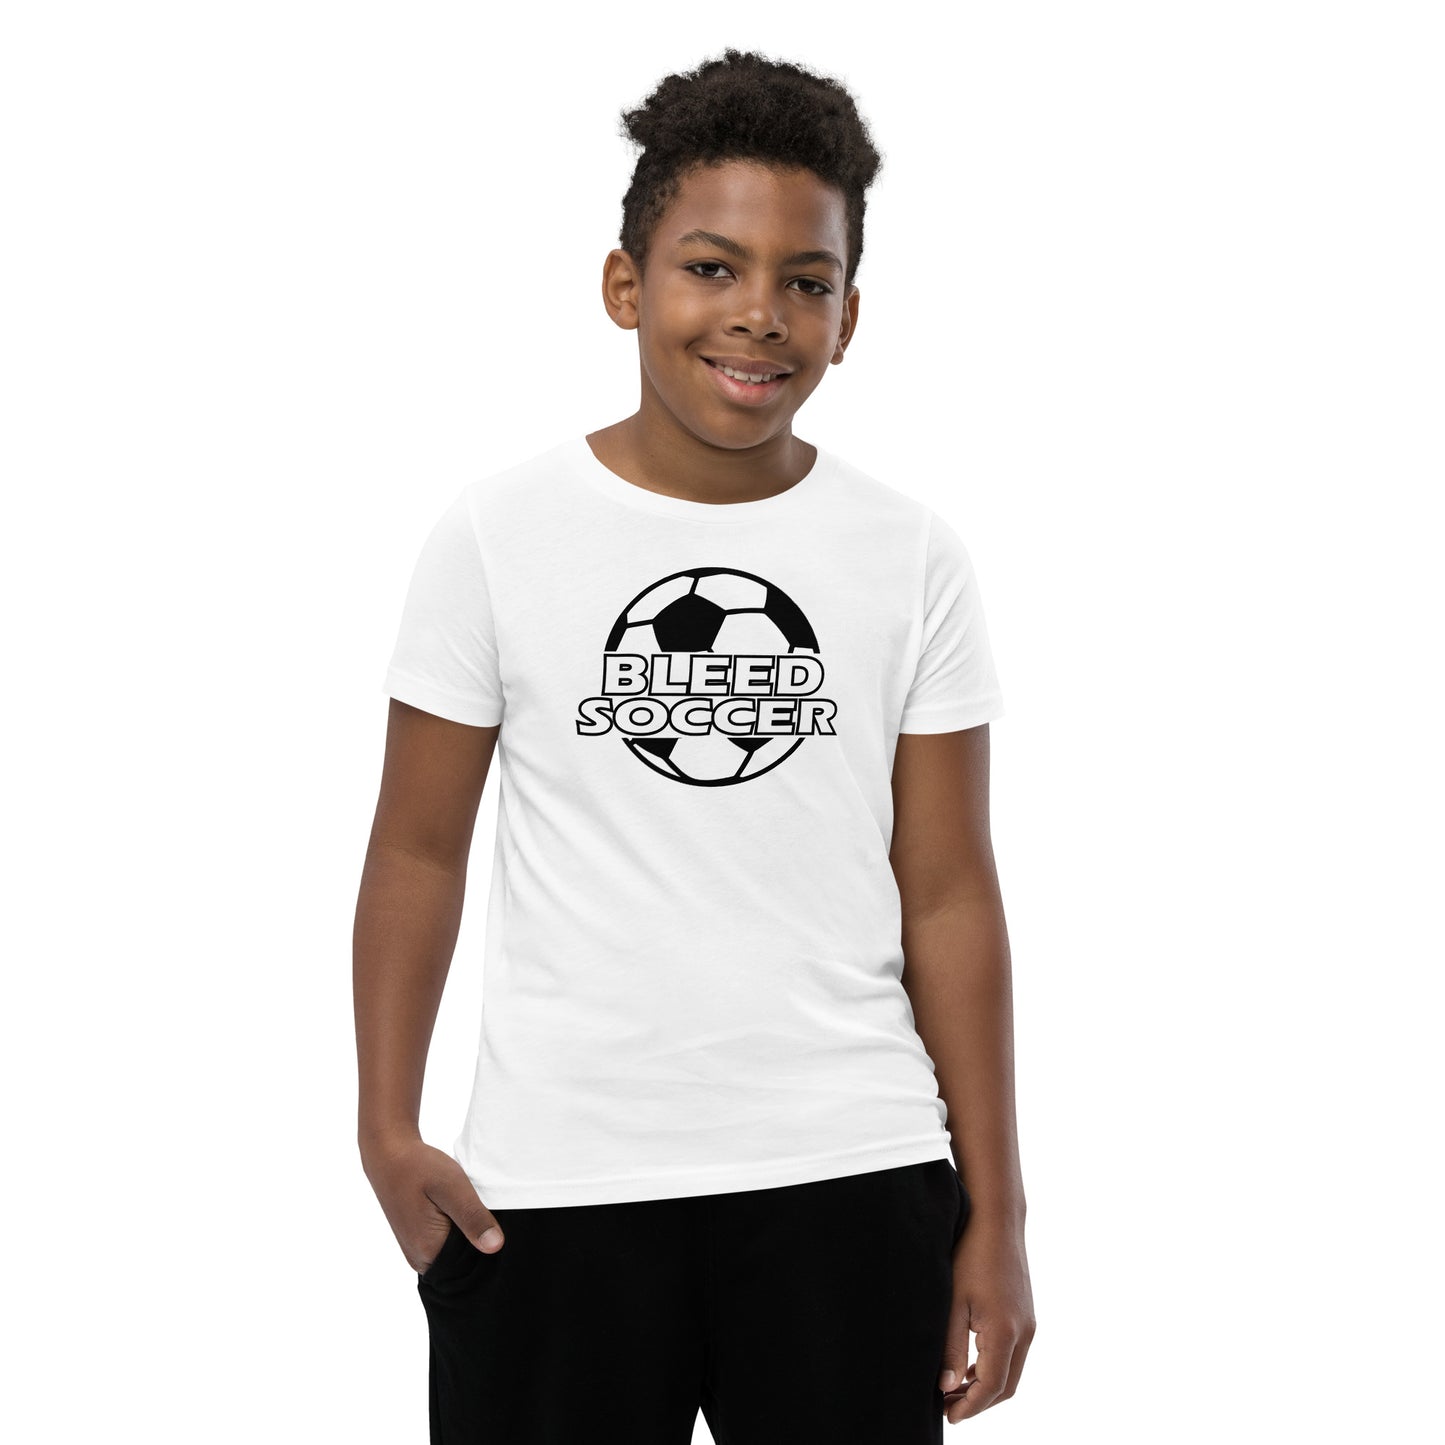 Best Bleed Soccer Printed Short Sleeve Youth T-Shirt Online 2022